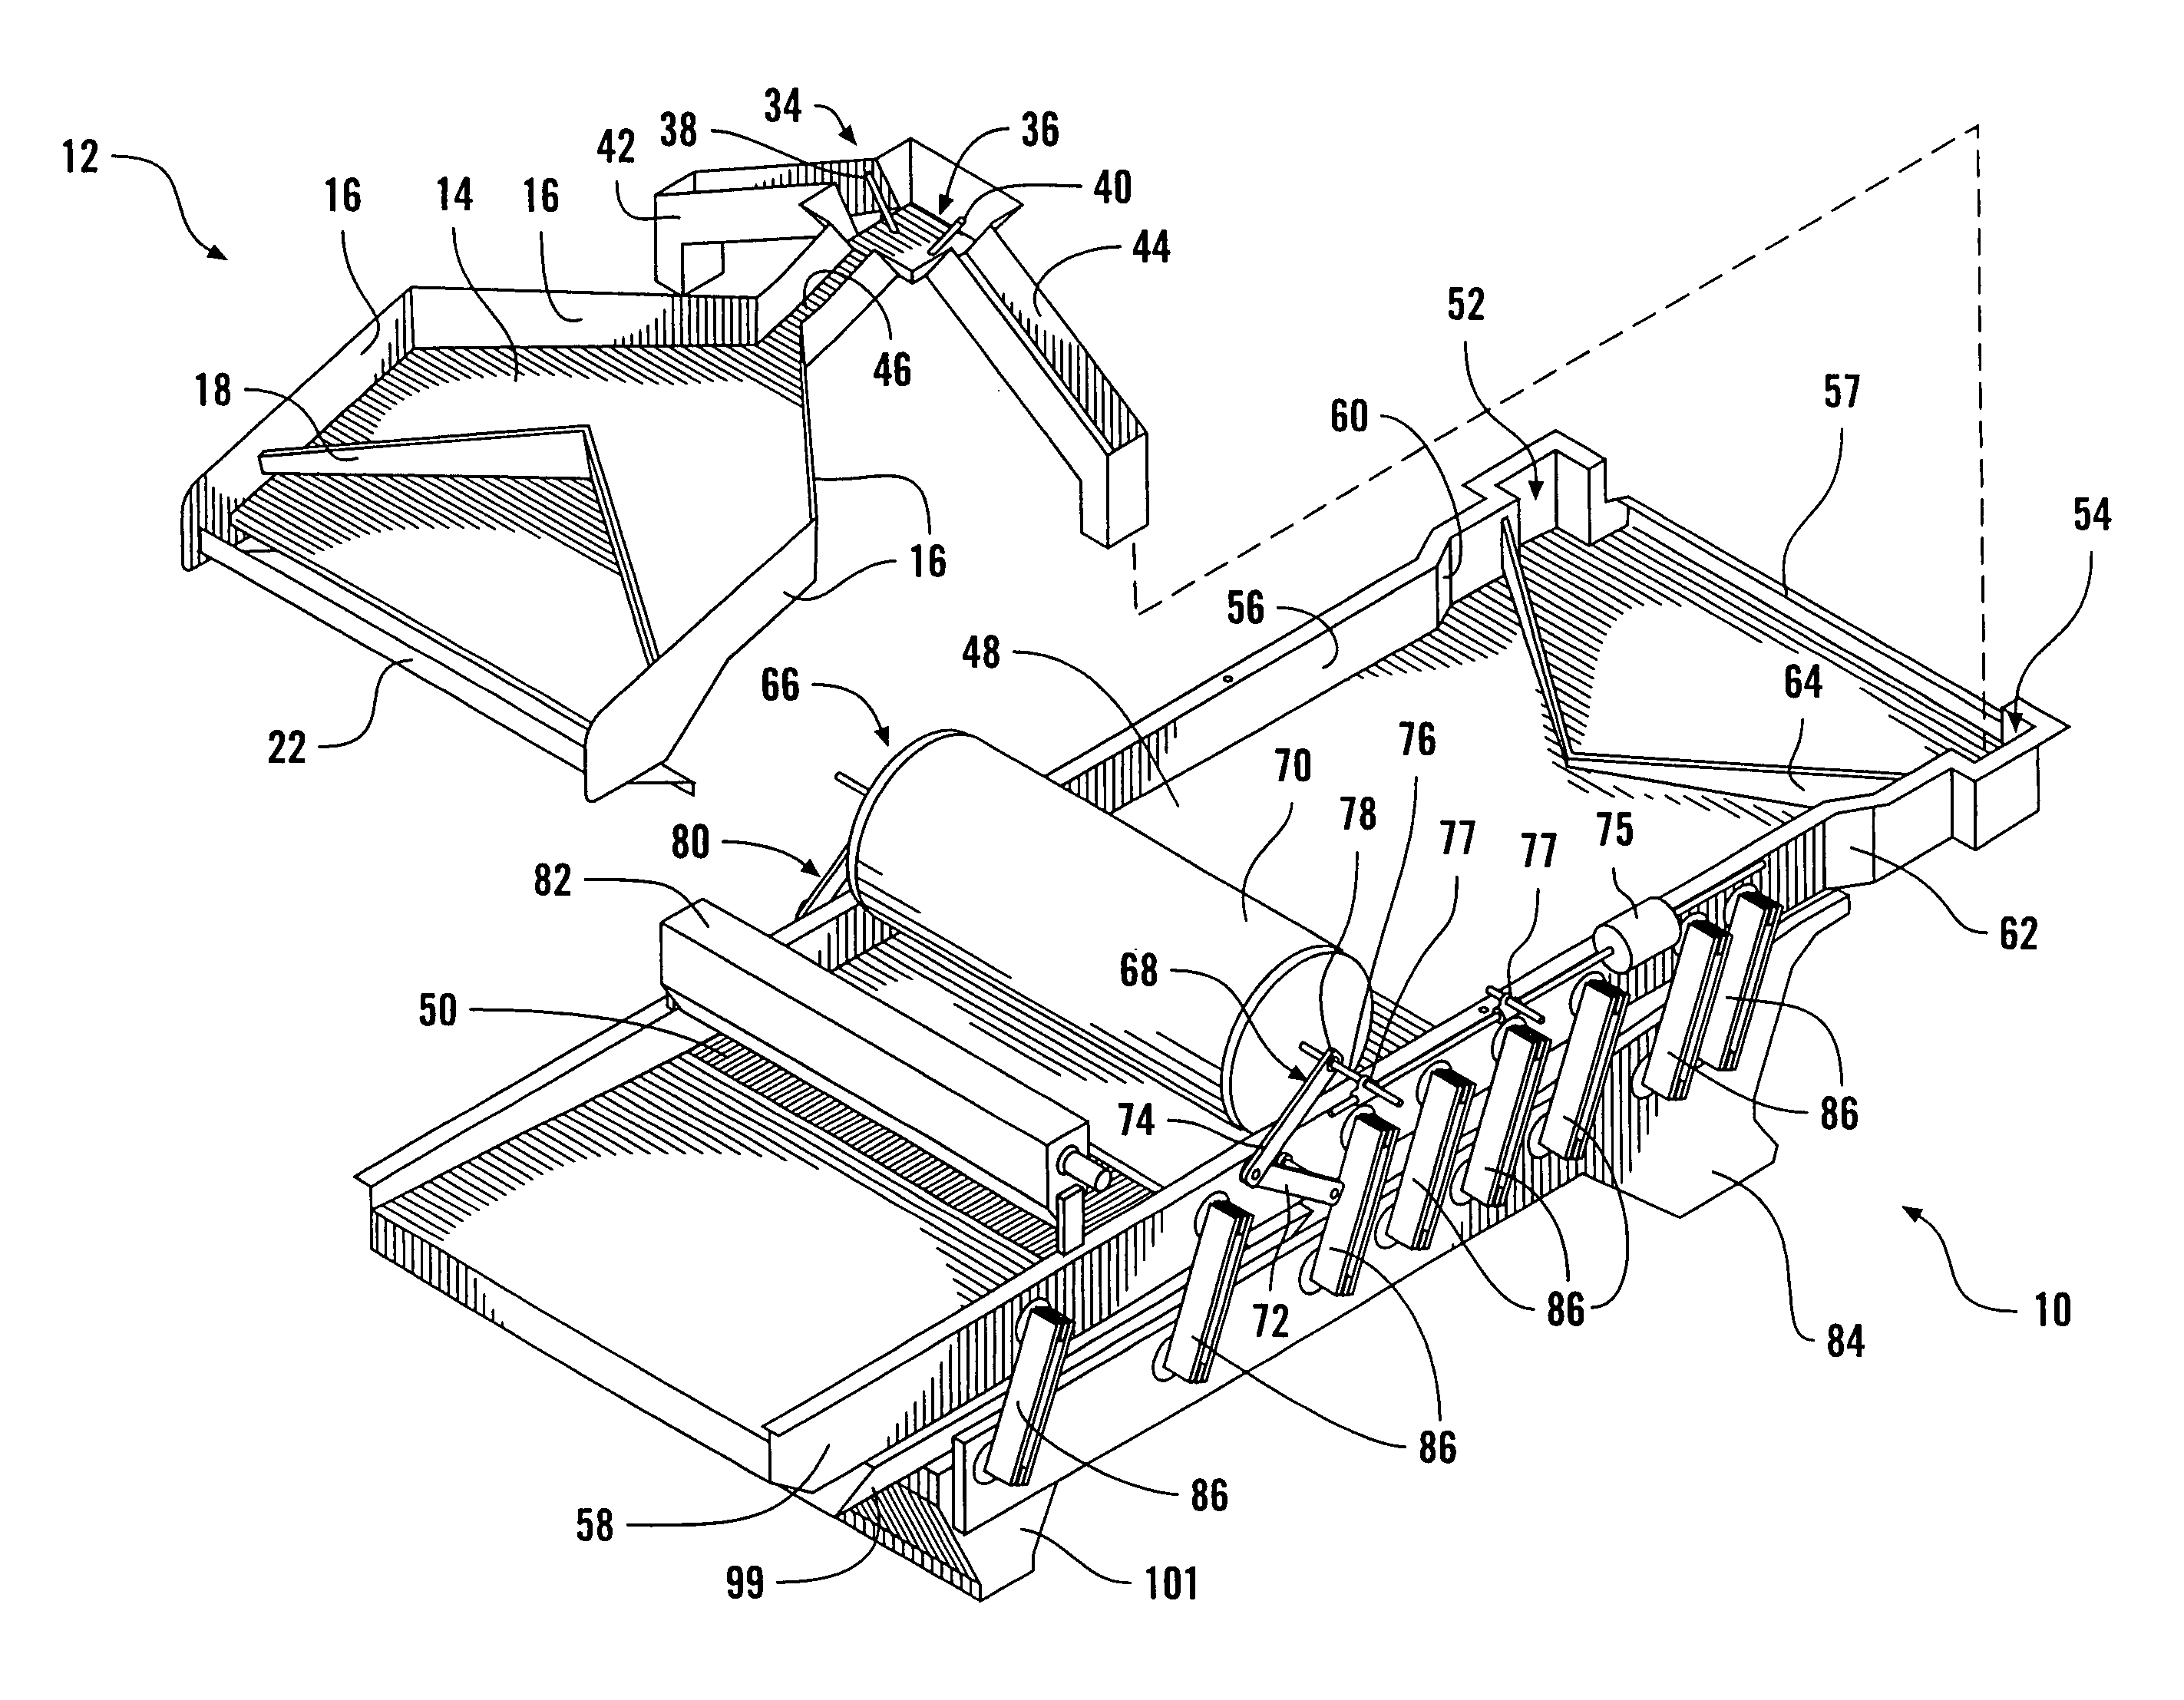 Vibrational excited frame food coating apparatus and methods of use thereof